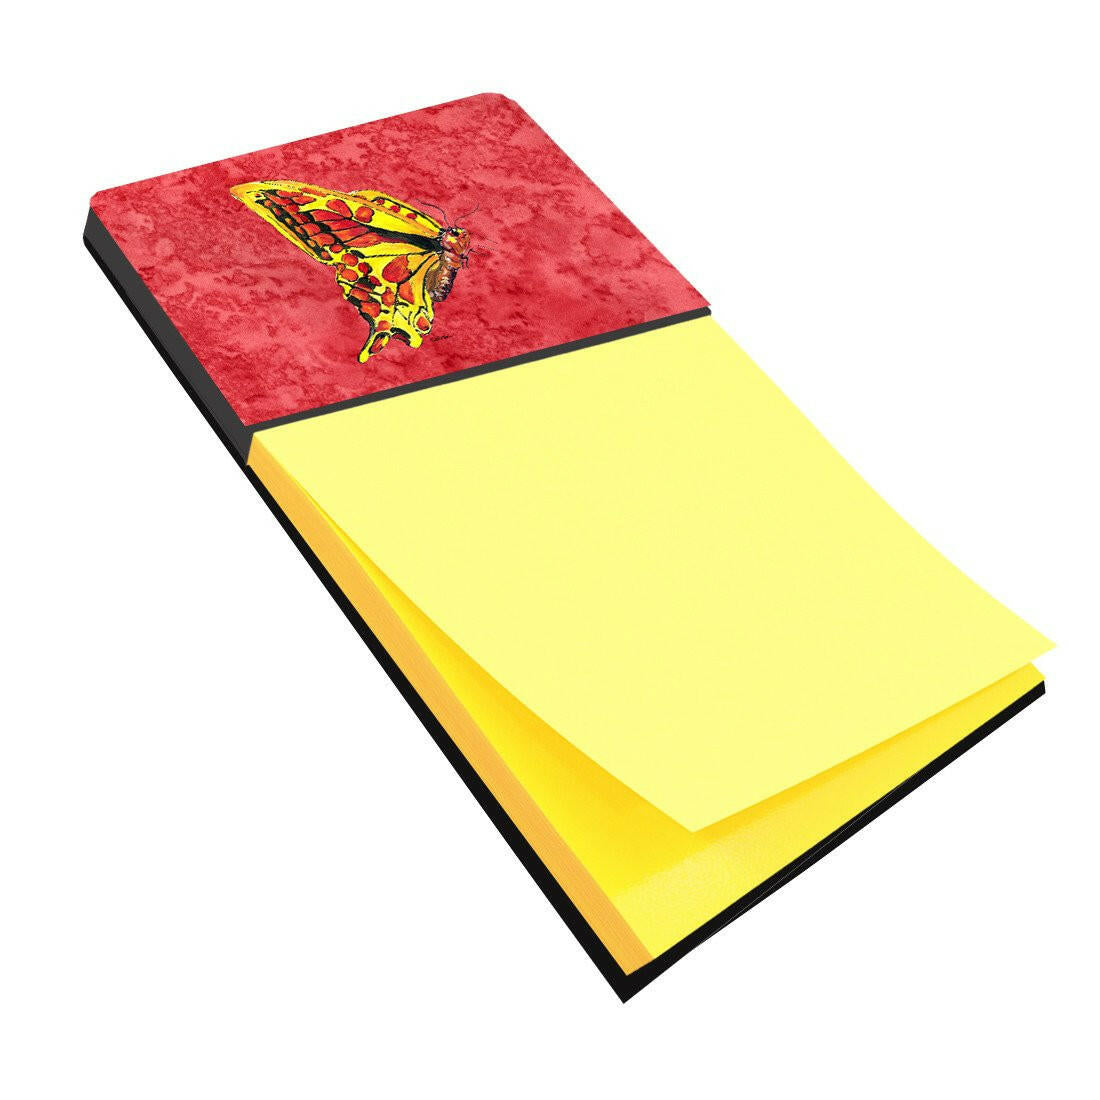 Butterfly on Red Refiillable Sticky Note Holder or Postit Note Dispenser 8862SN by Caroline's Treasures